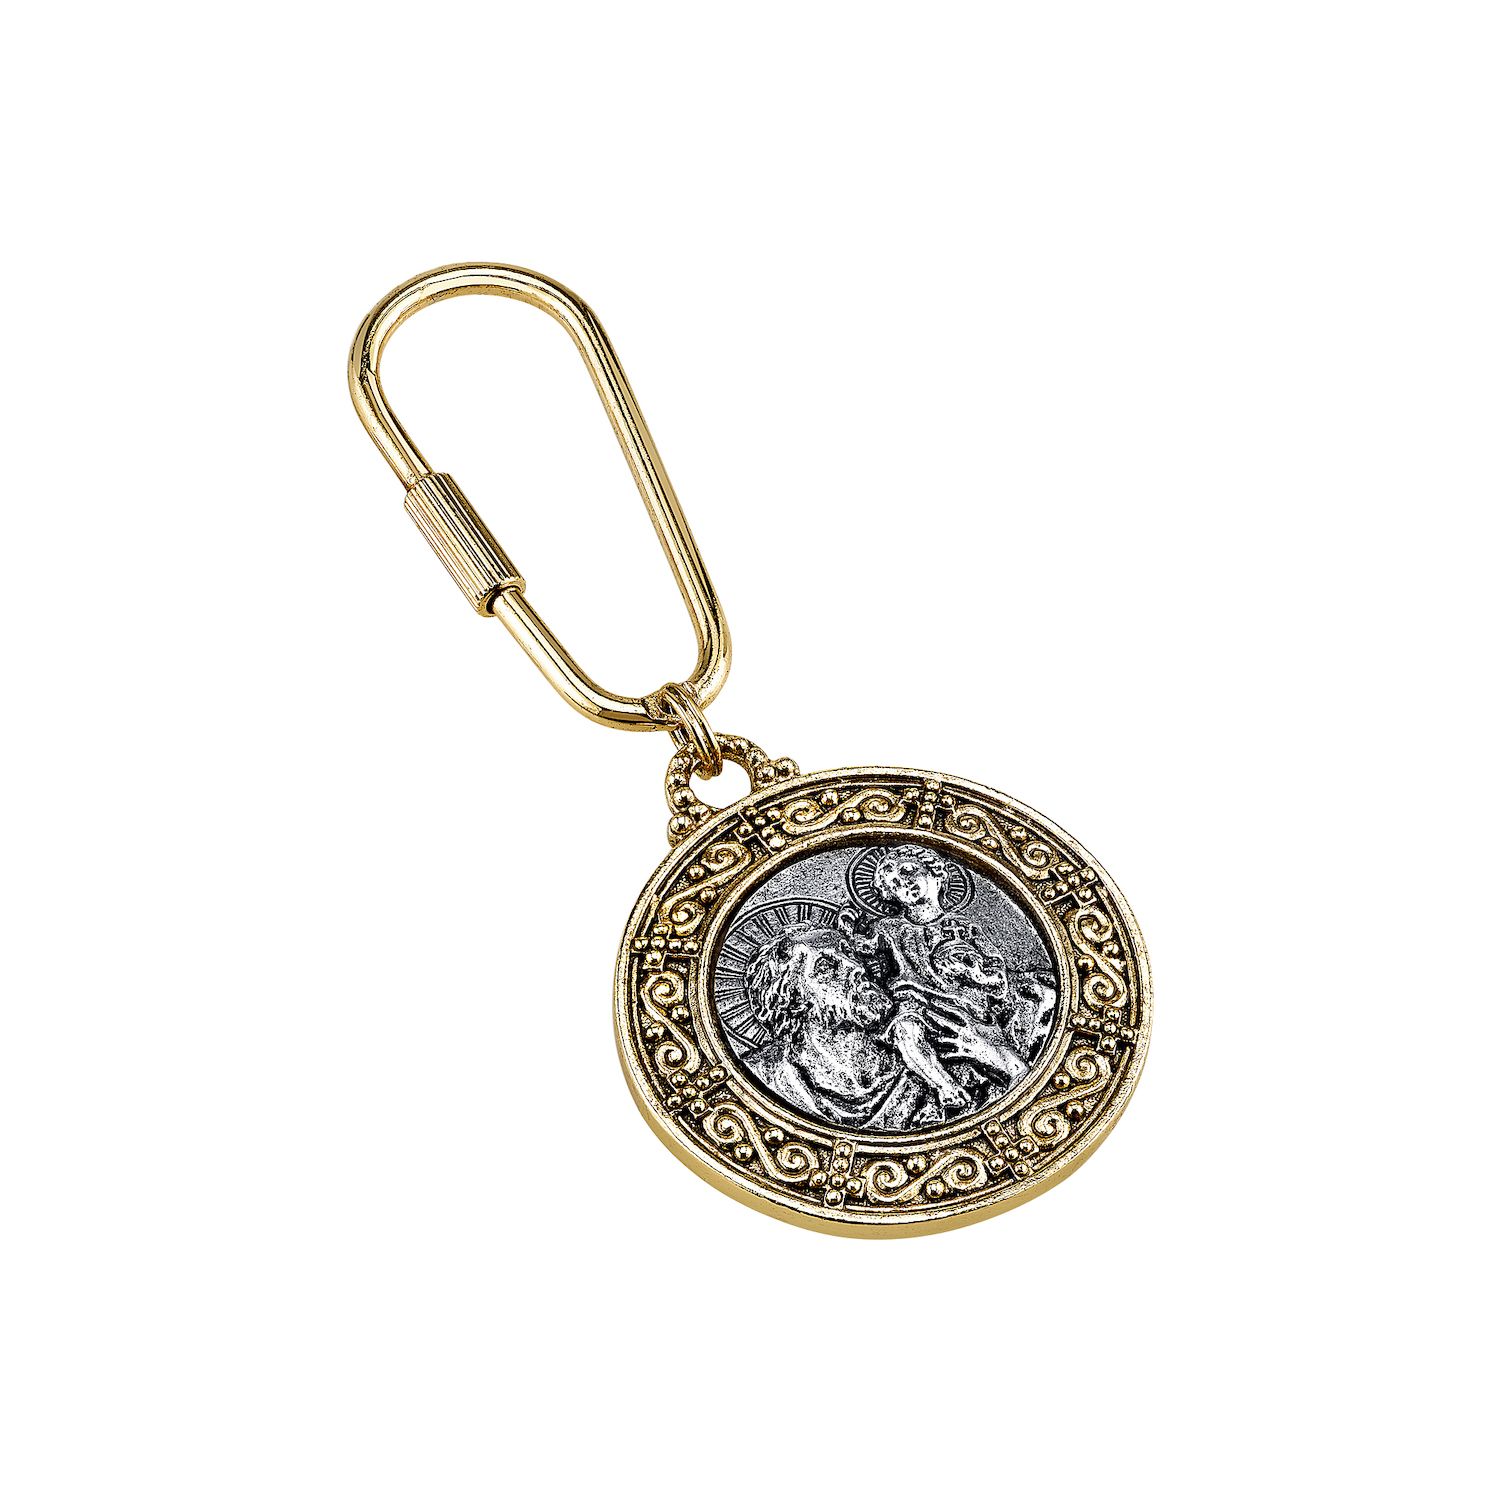 14K Gold Key Ring, St. Christopher - Holy Gold Jewelry